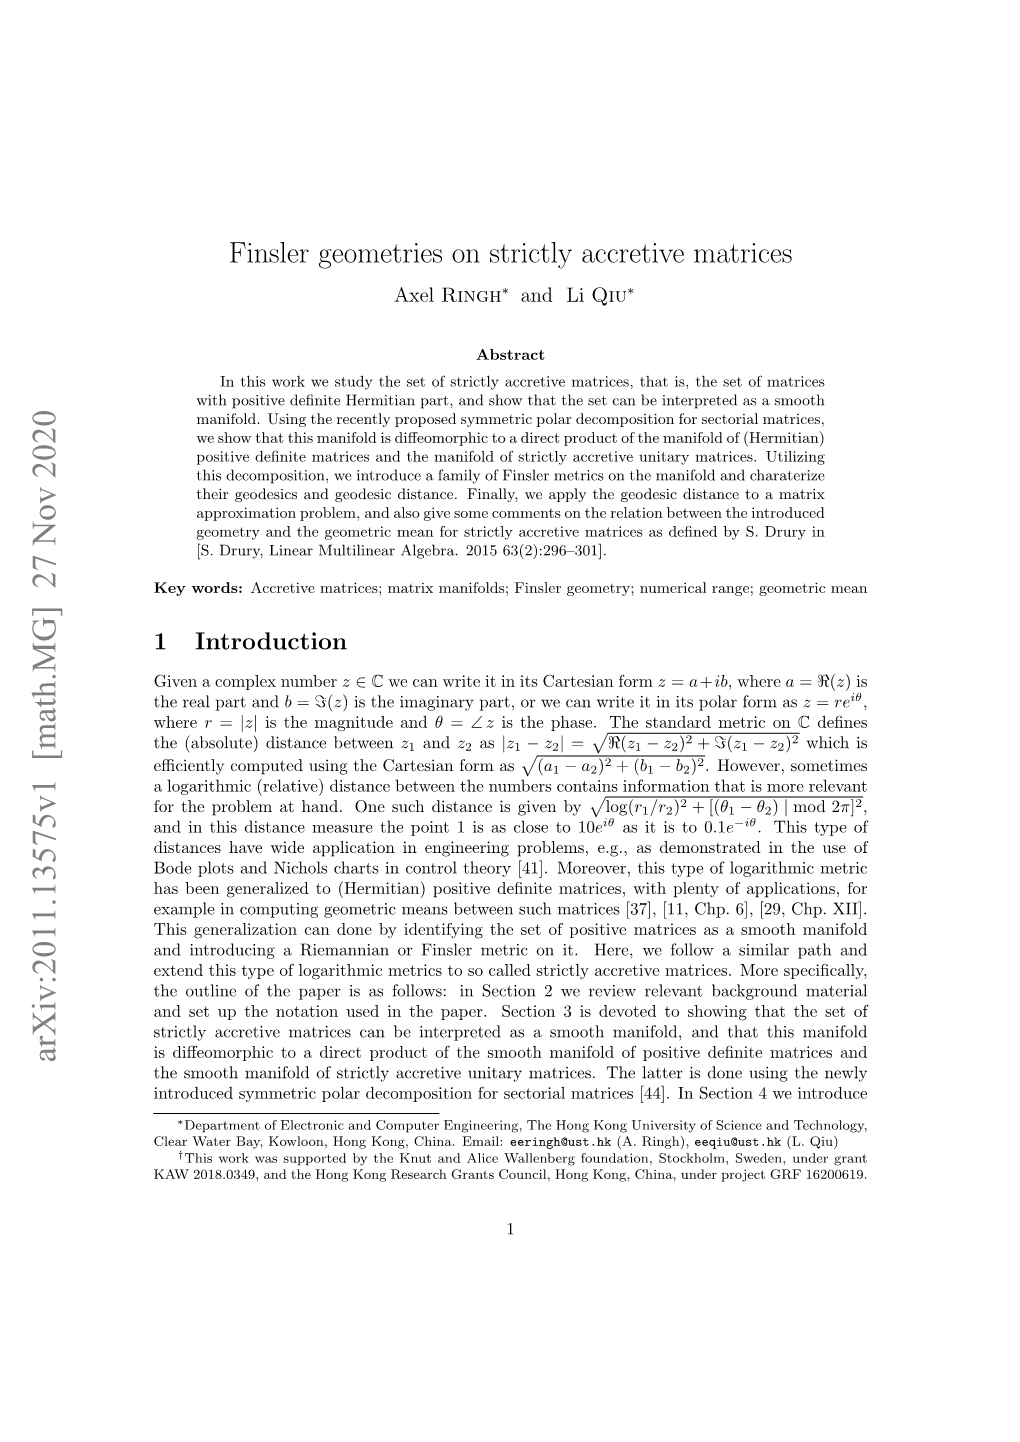 Finsler Geometries on Strictly Accretive Matrices Axel Ringh∗ and Li Qiu∗